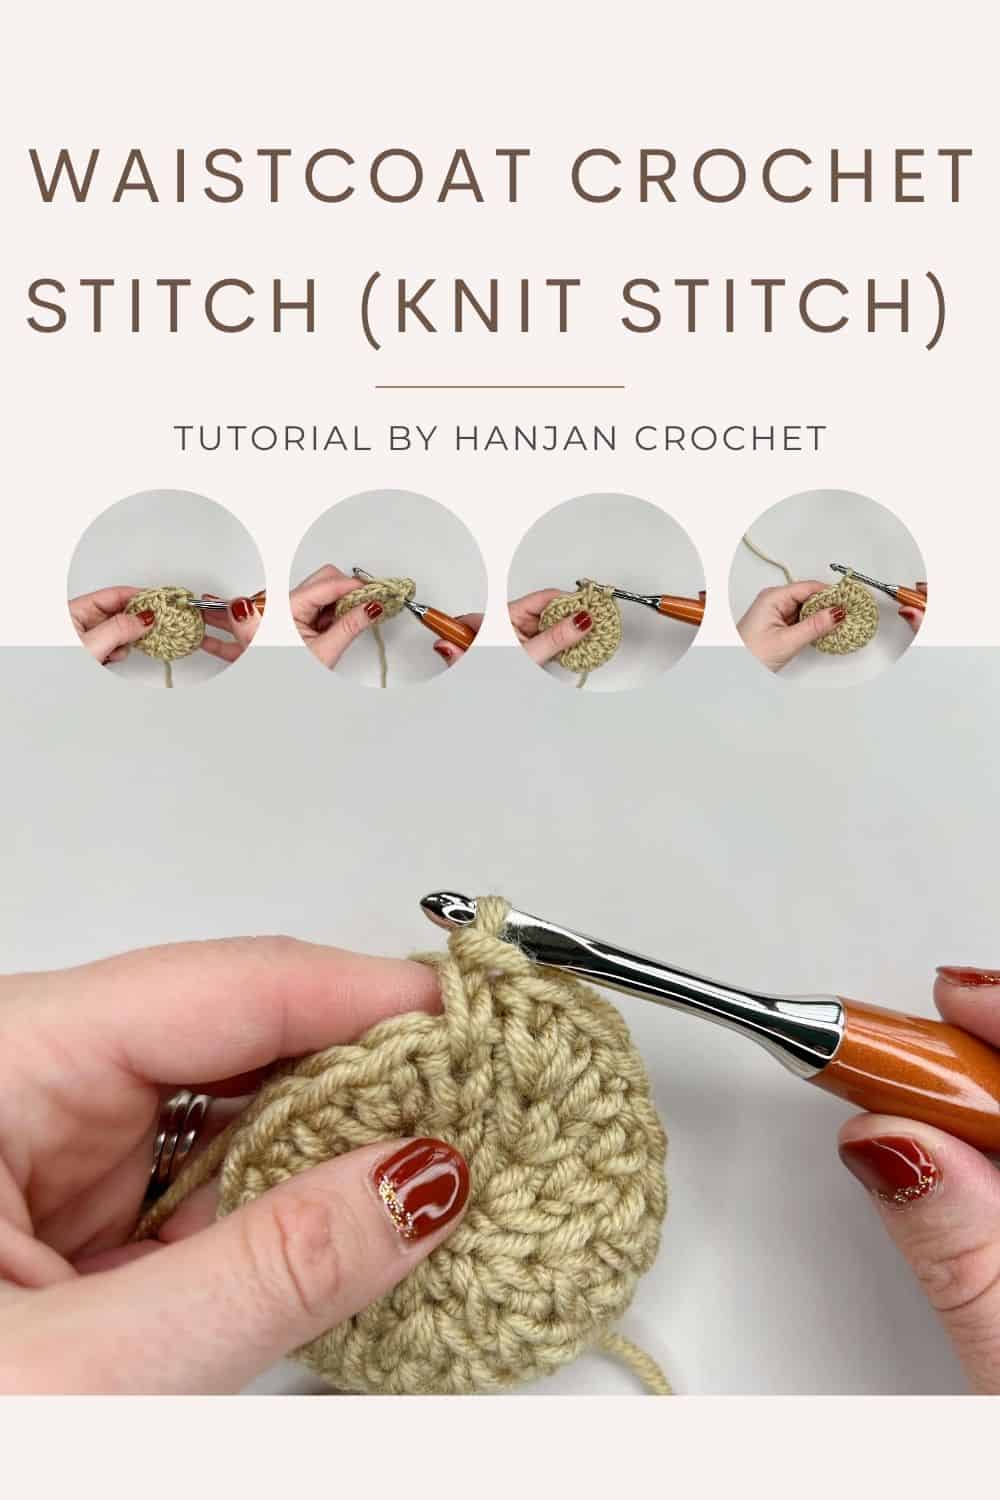 Pin Image showing the step by step process needed to complete a waistcoat crochet stitch (knit stitch)